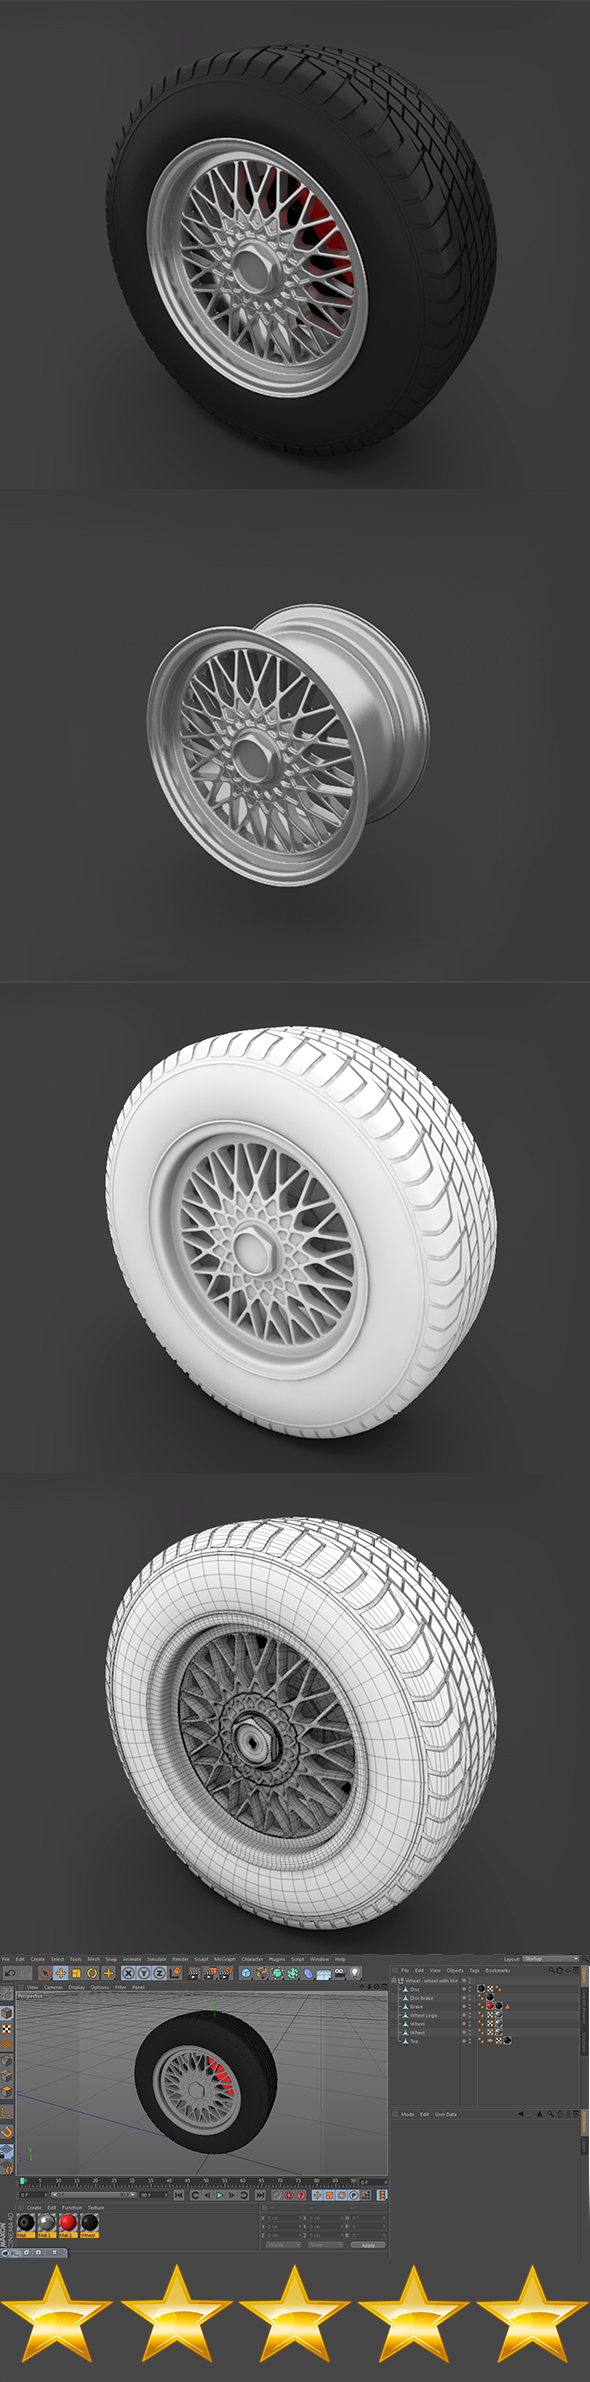 Wheel with tire - 3Docean 23051813